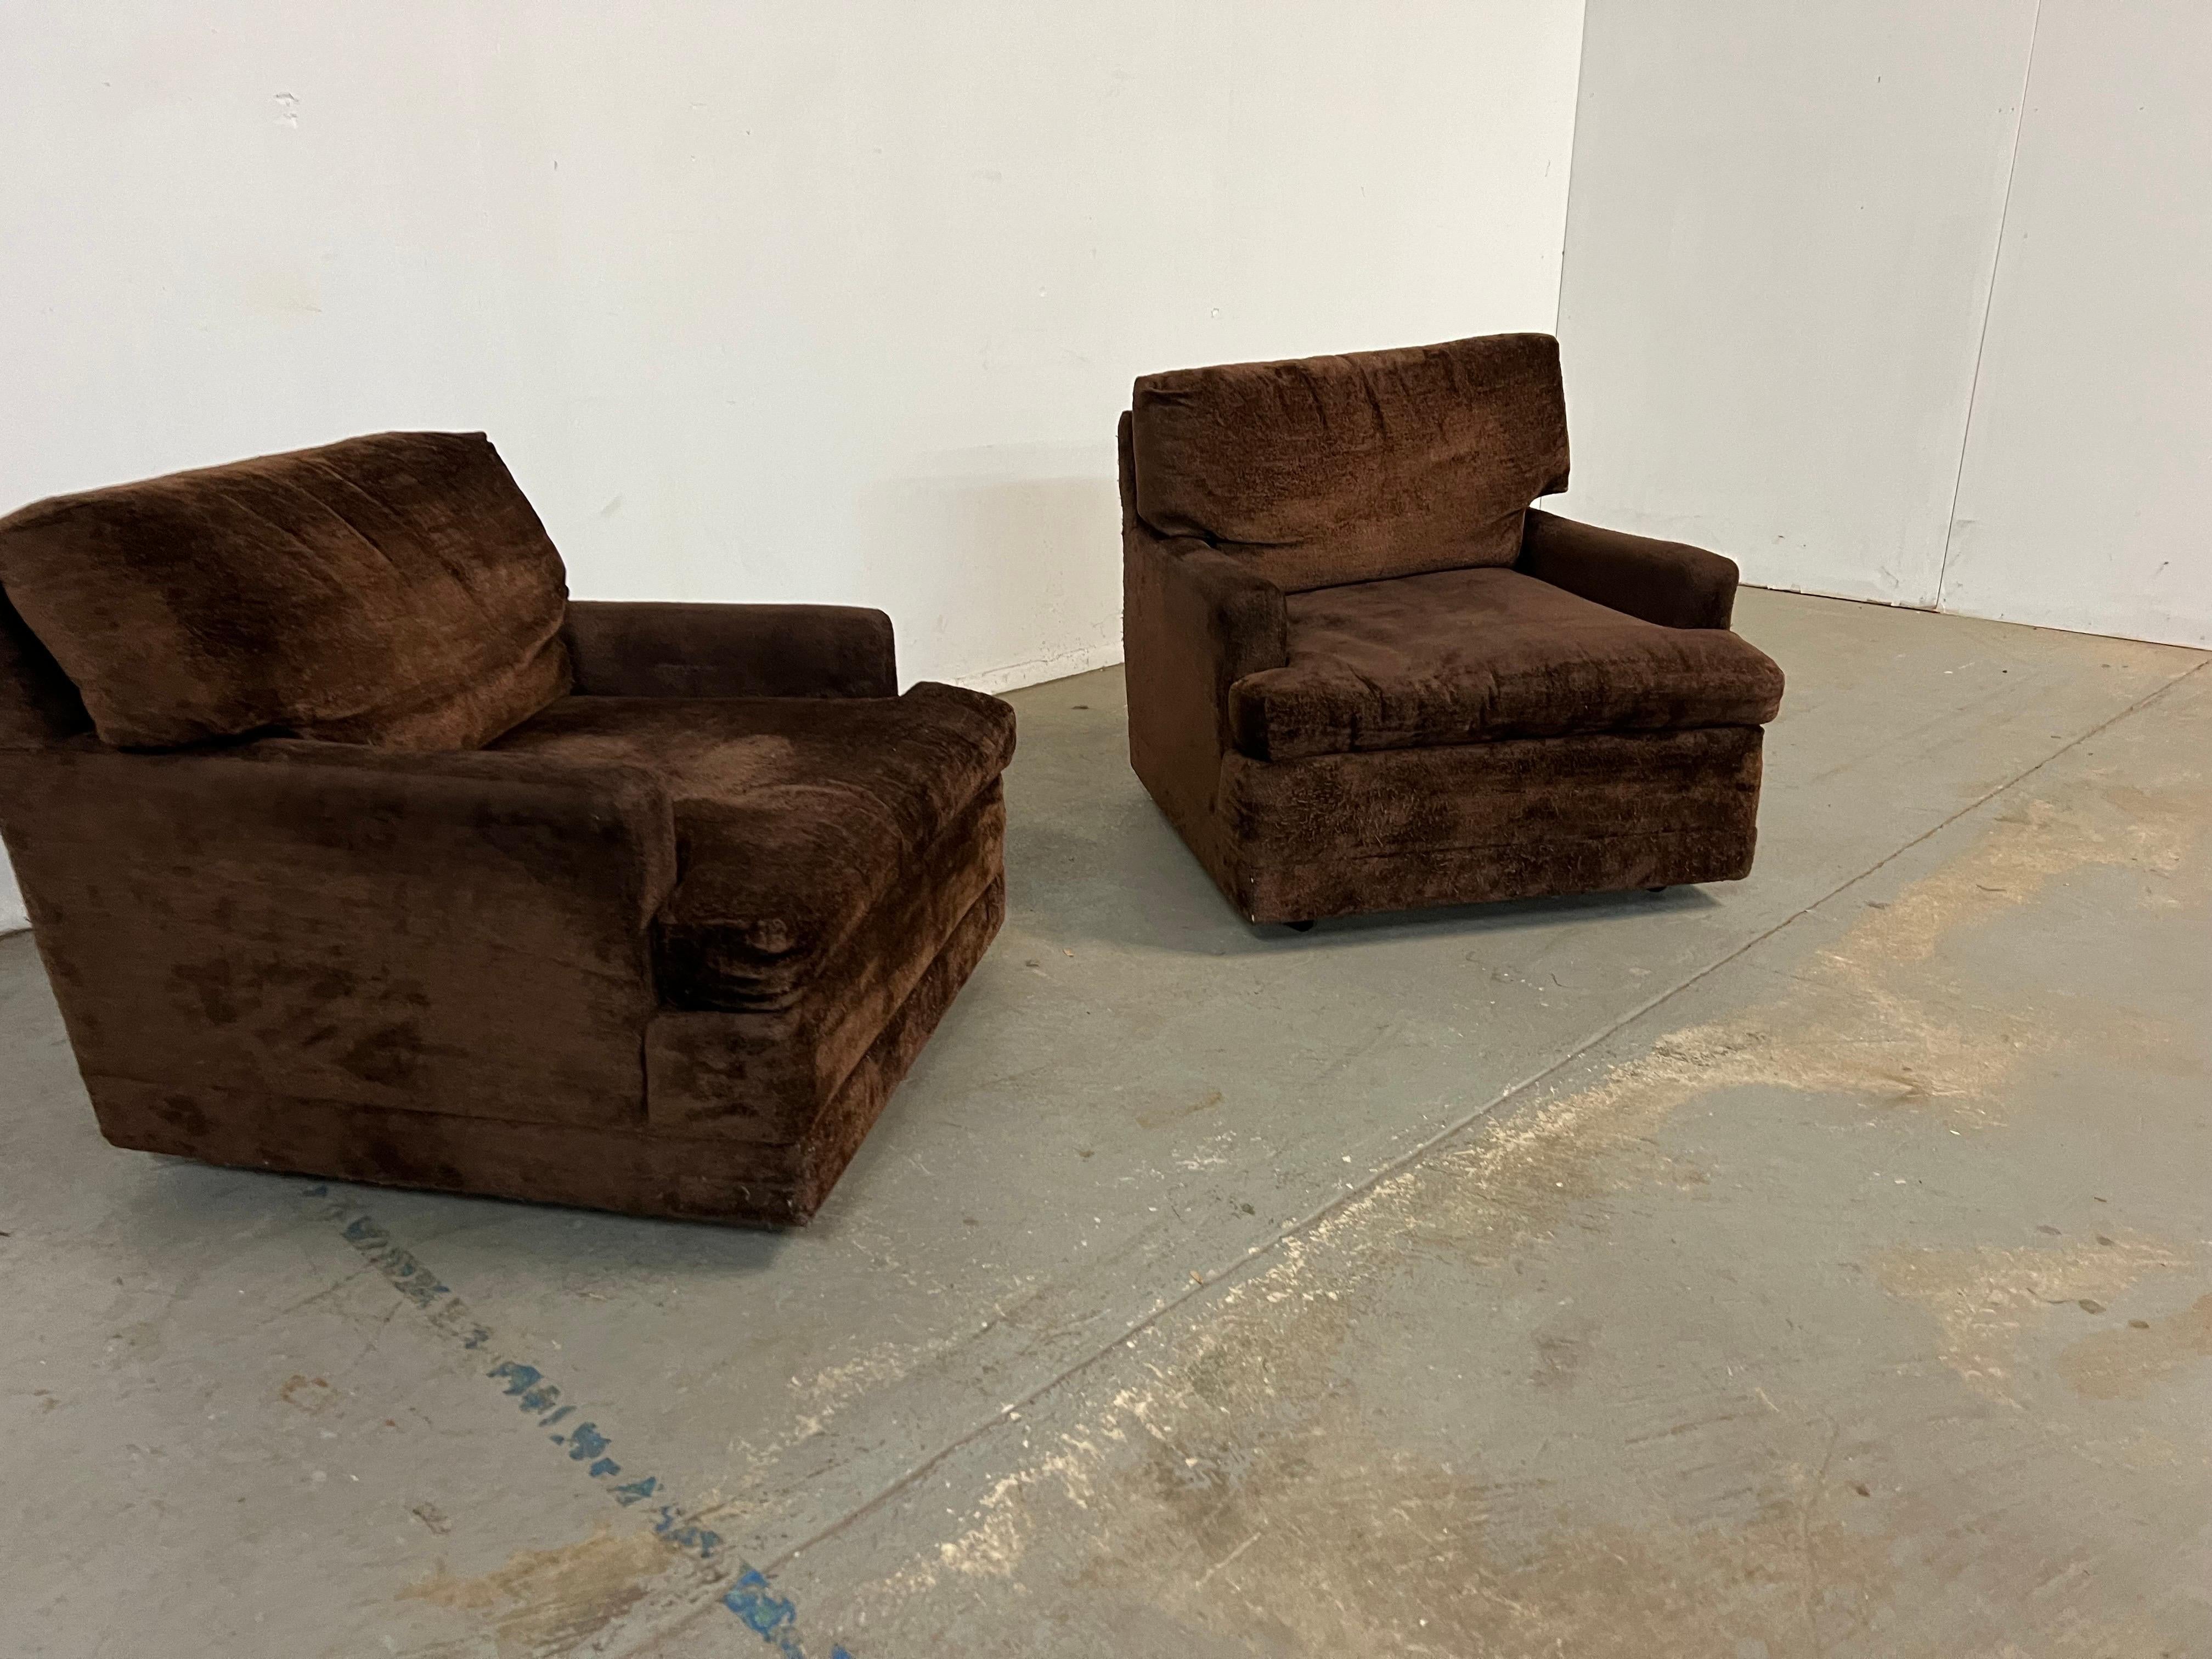 Offered is a pair of vintage Mid-Century Modern style lounge/club chairs on rollers. The Cube design is in line with the era -true Lounge Pit Chairs-Deep and Low. The chairs are quite confortable. Perfect for any space or design project, make them